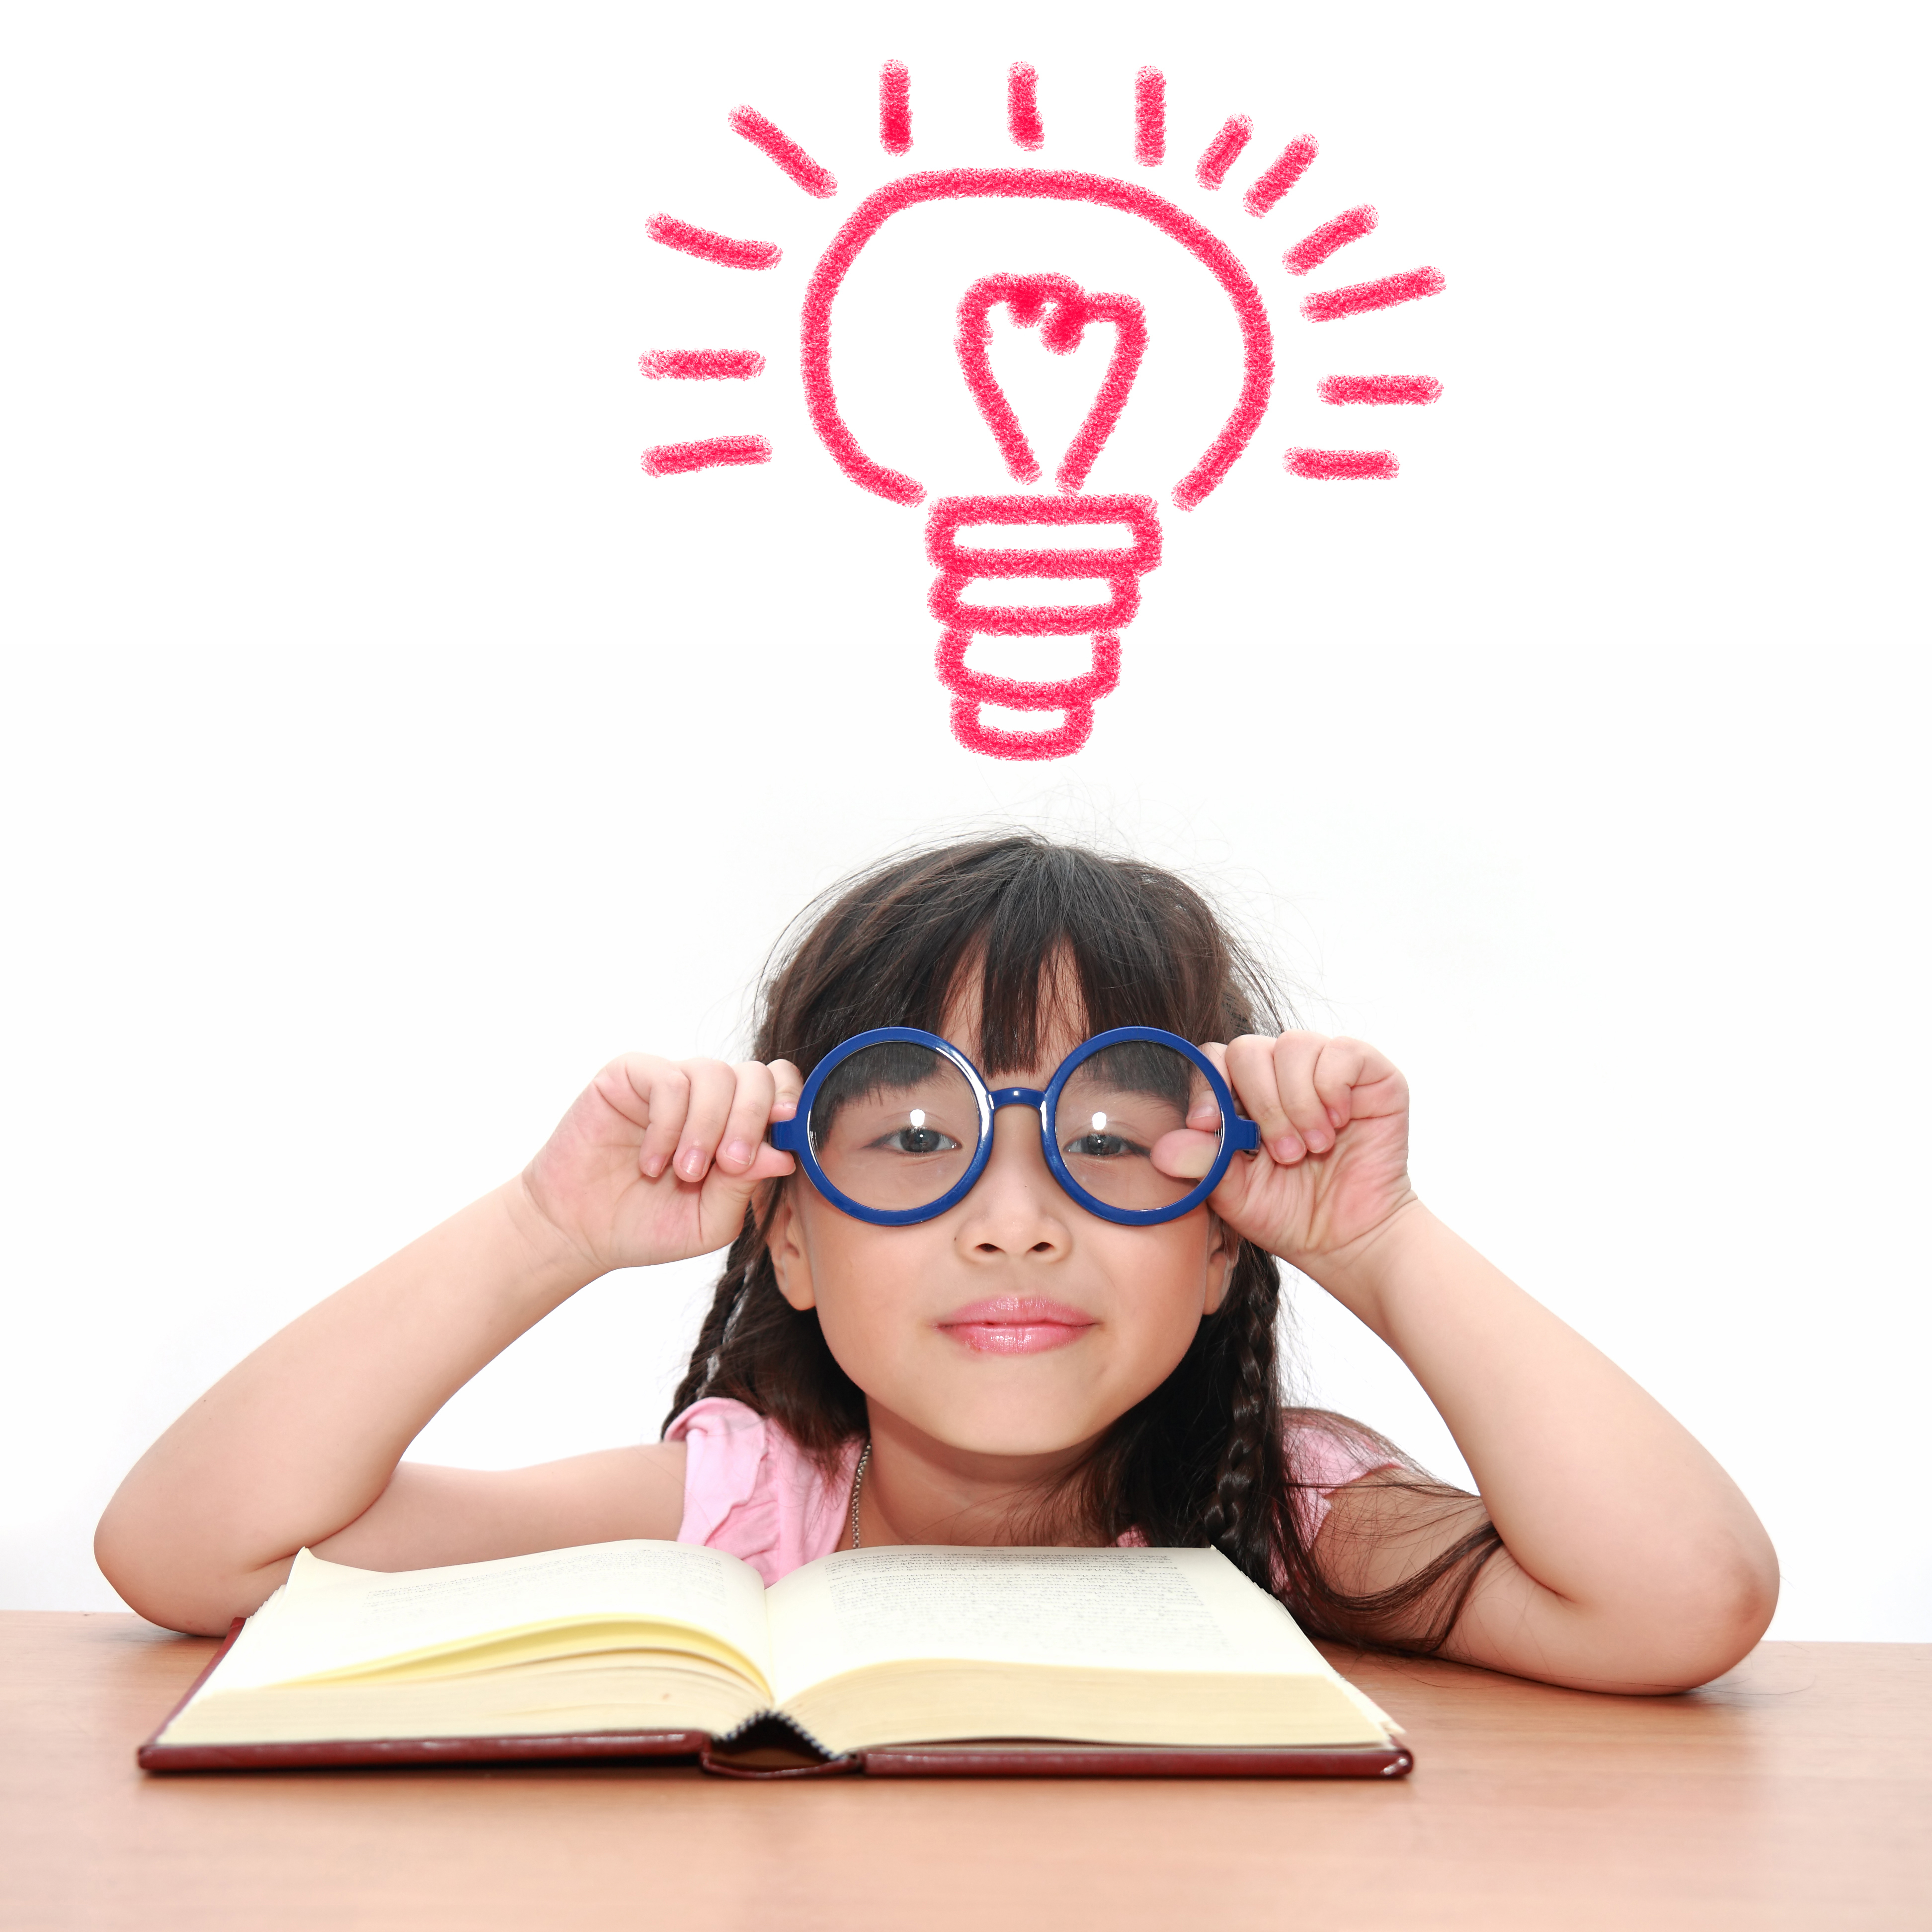 A girl wearing glasses, reading a book with a drawn lighbulb over her head